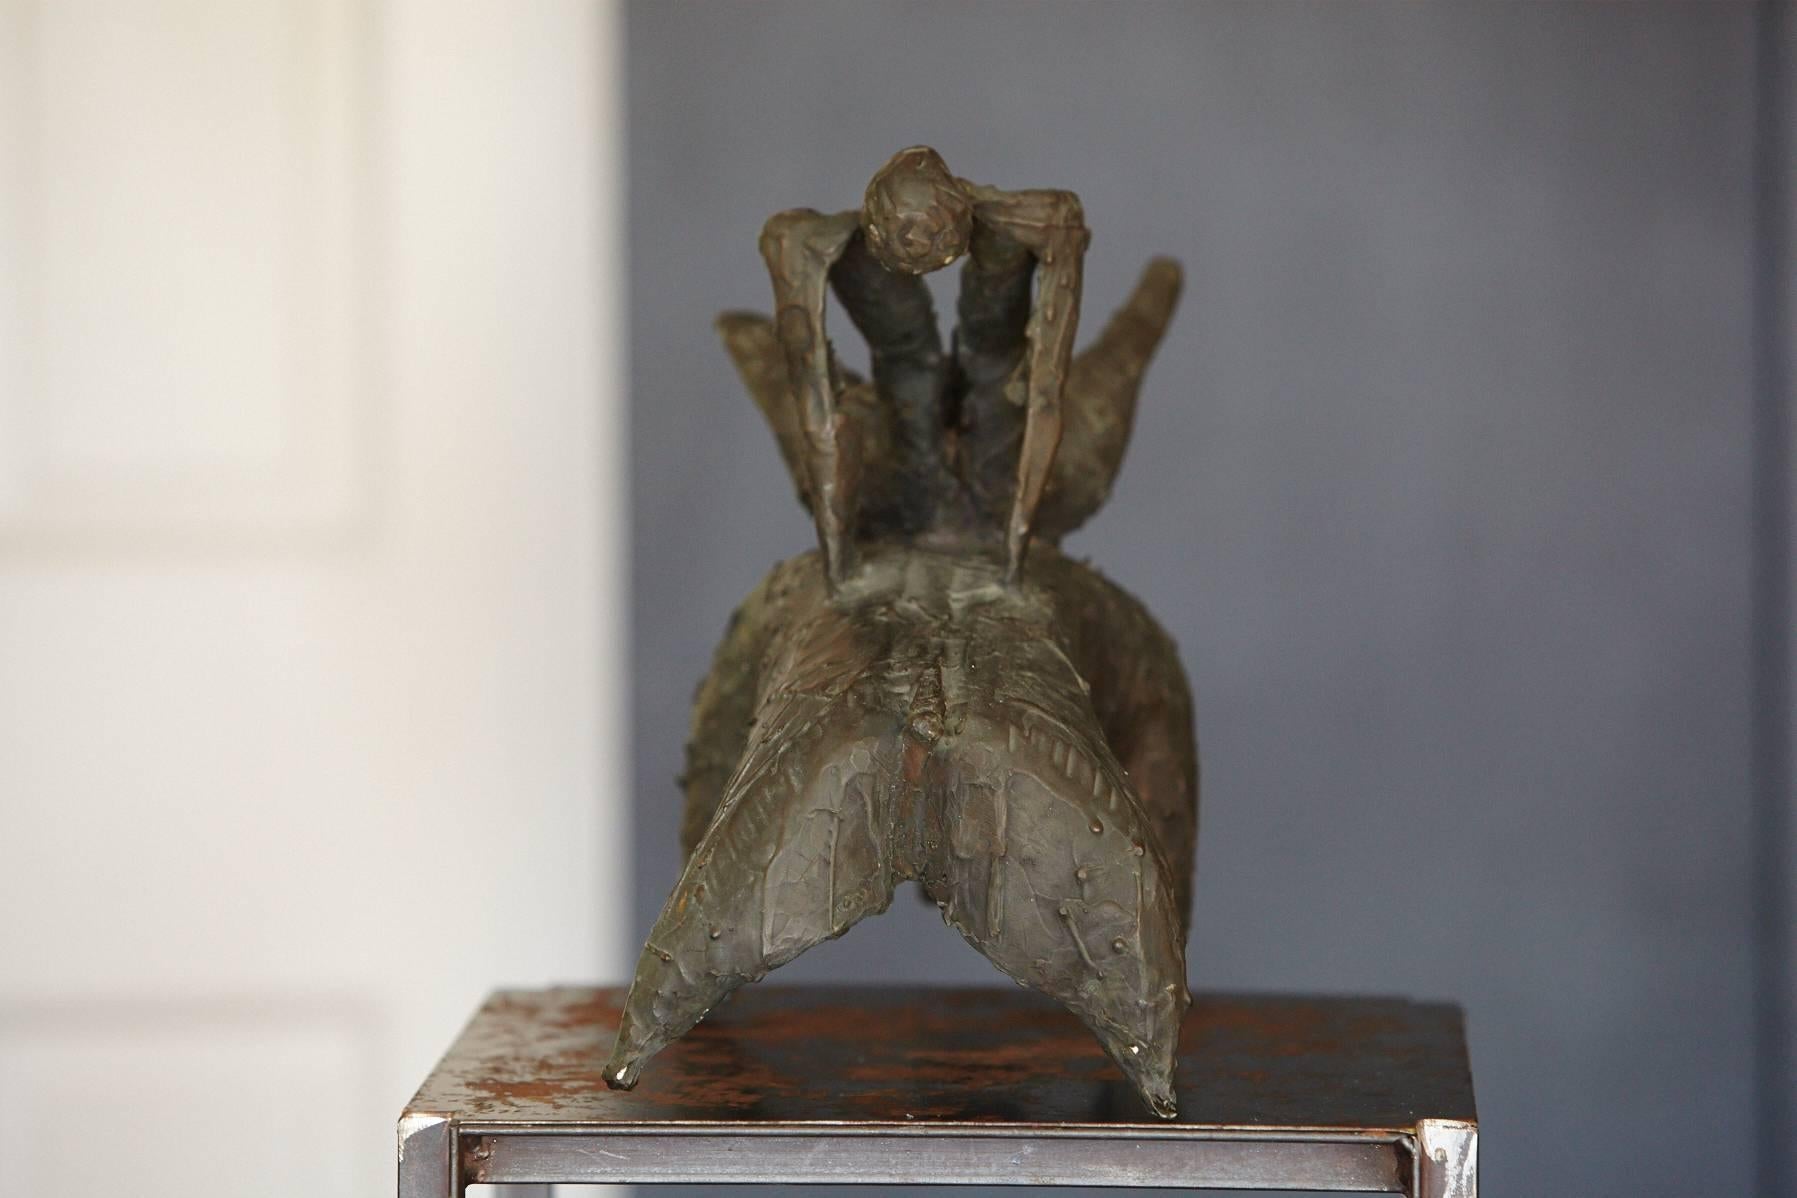 Blackened Figurative Brutalist Sculpture of a Woman Riding a Bull